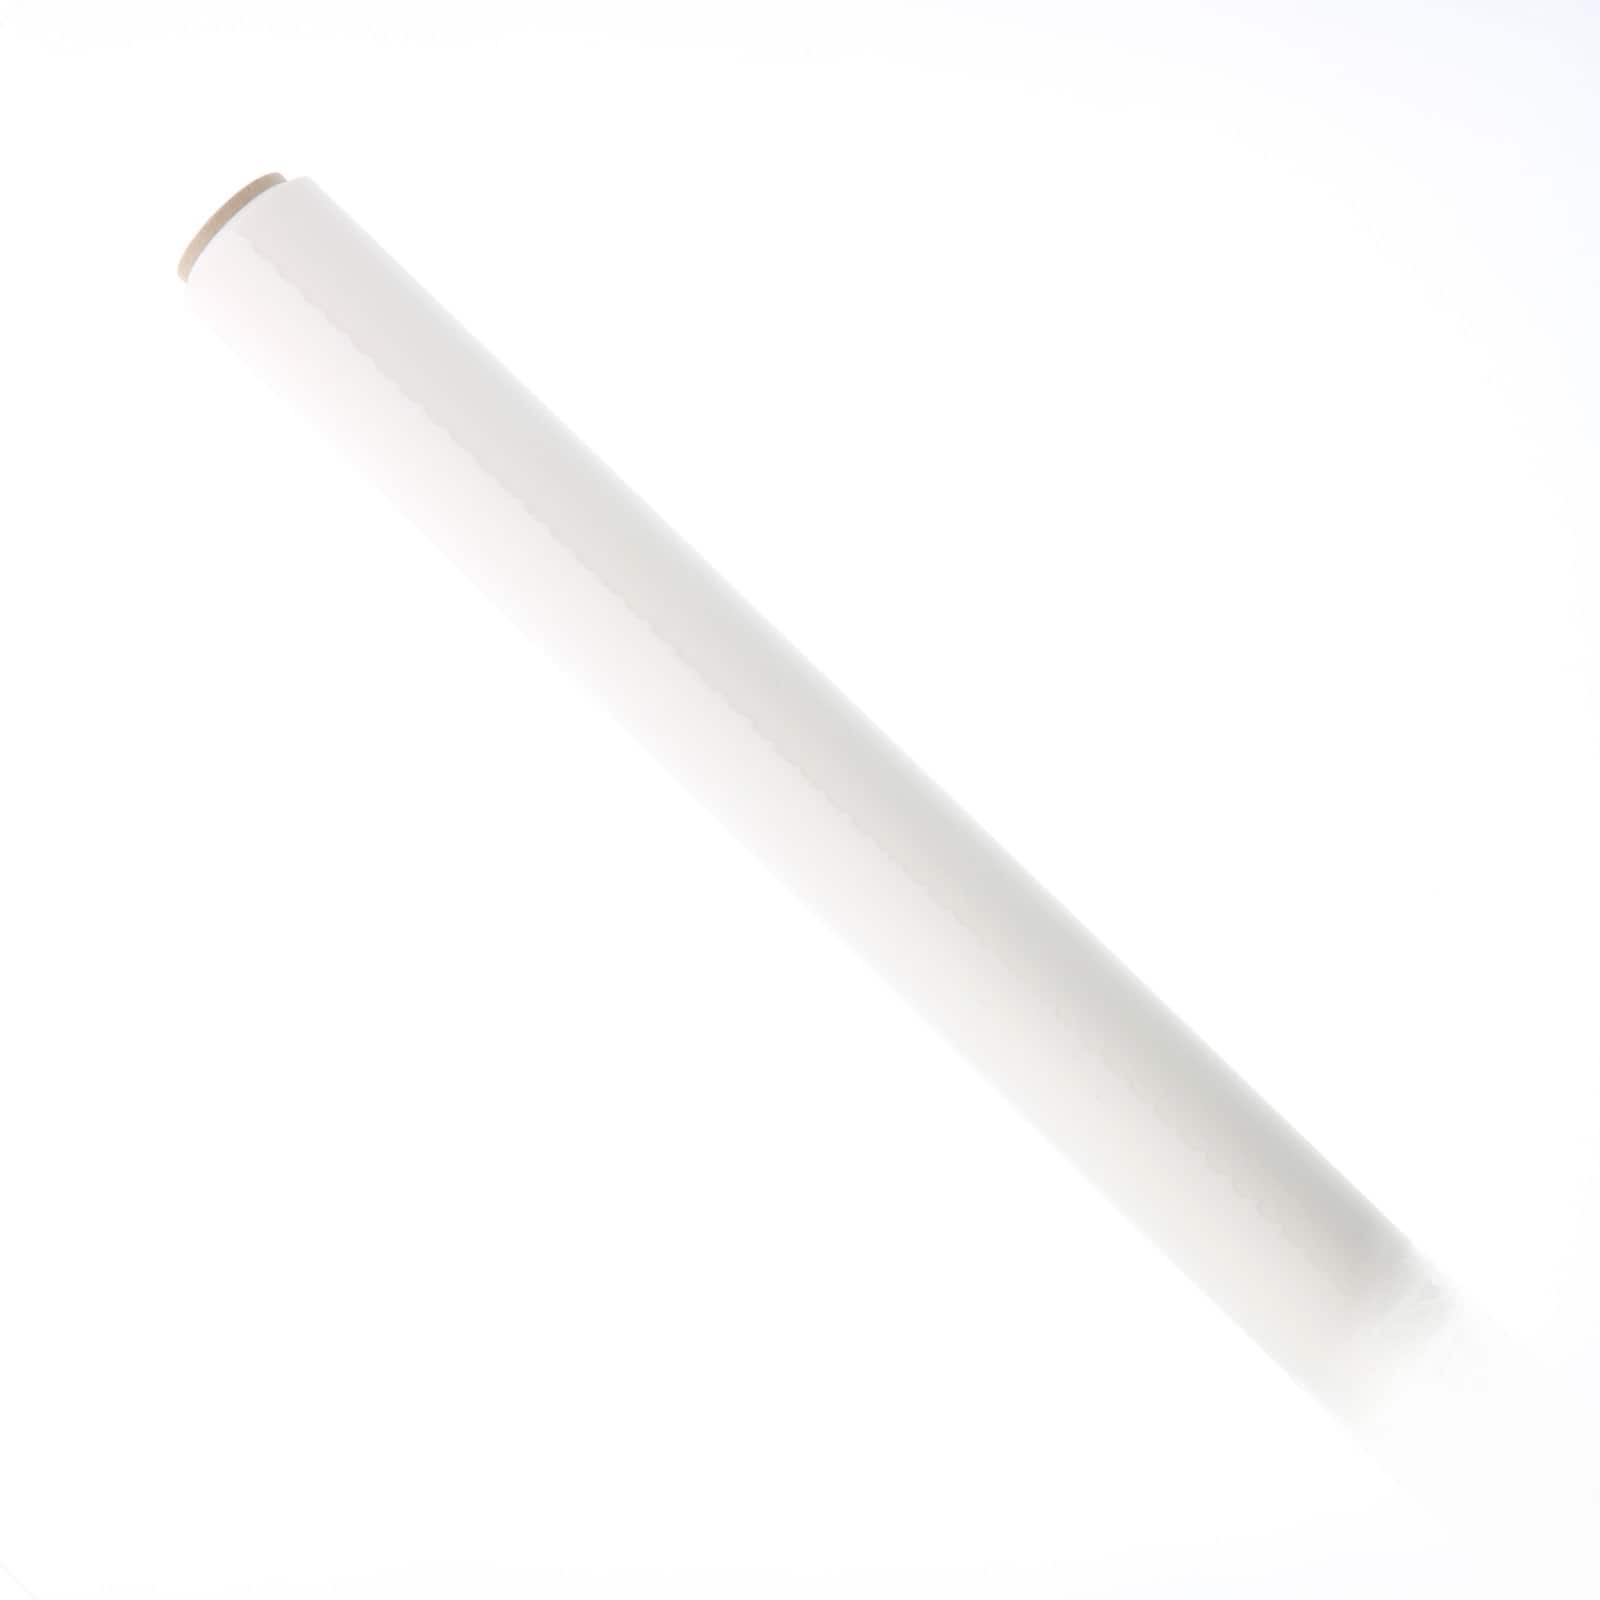 BIENFANG Parchment 100 Tracing Paper Rolls on sale at